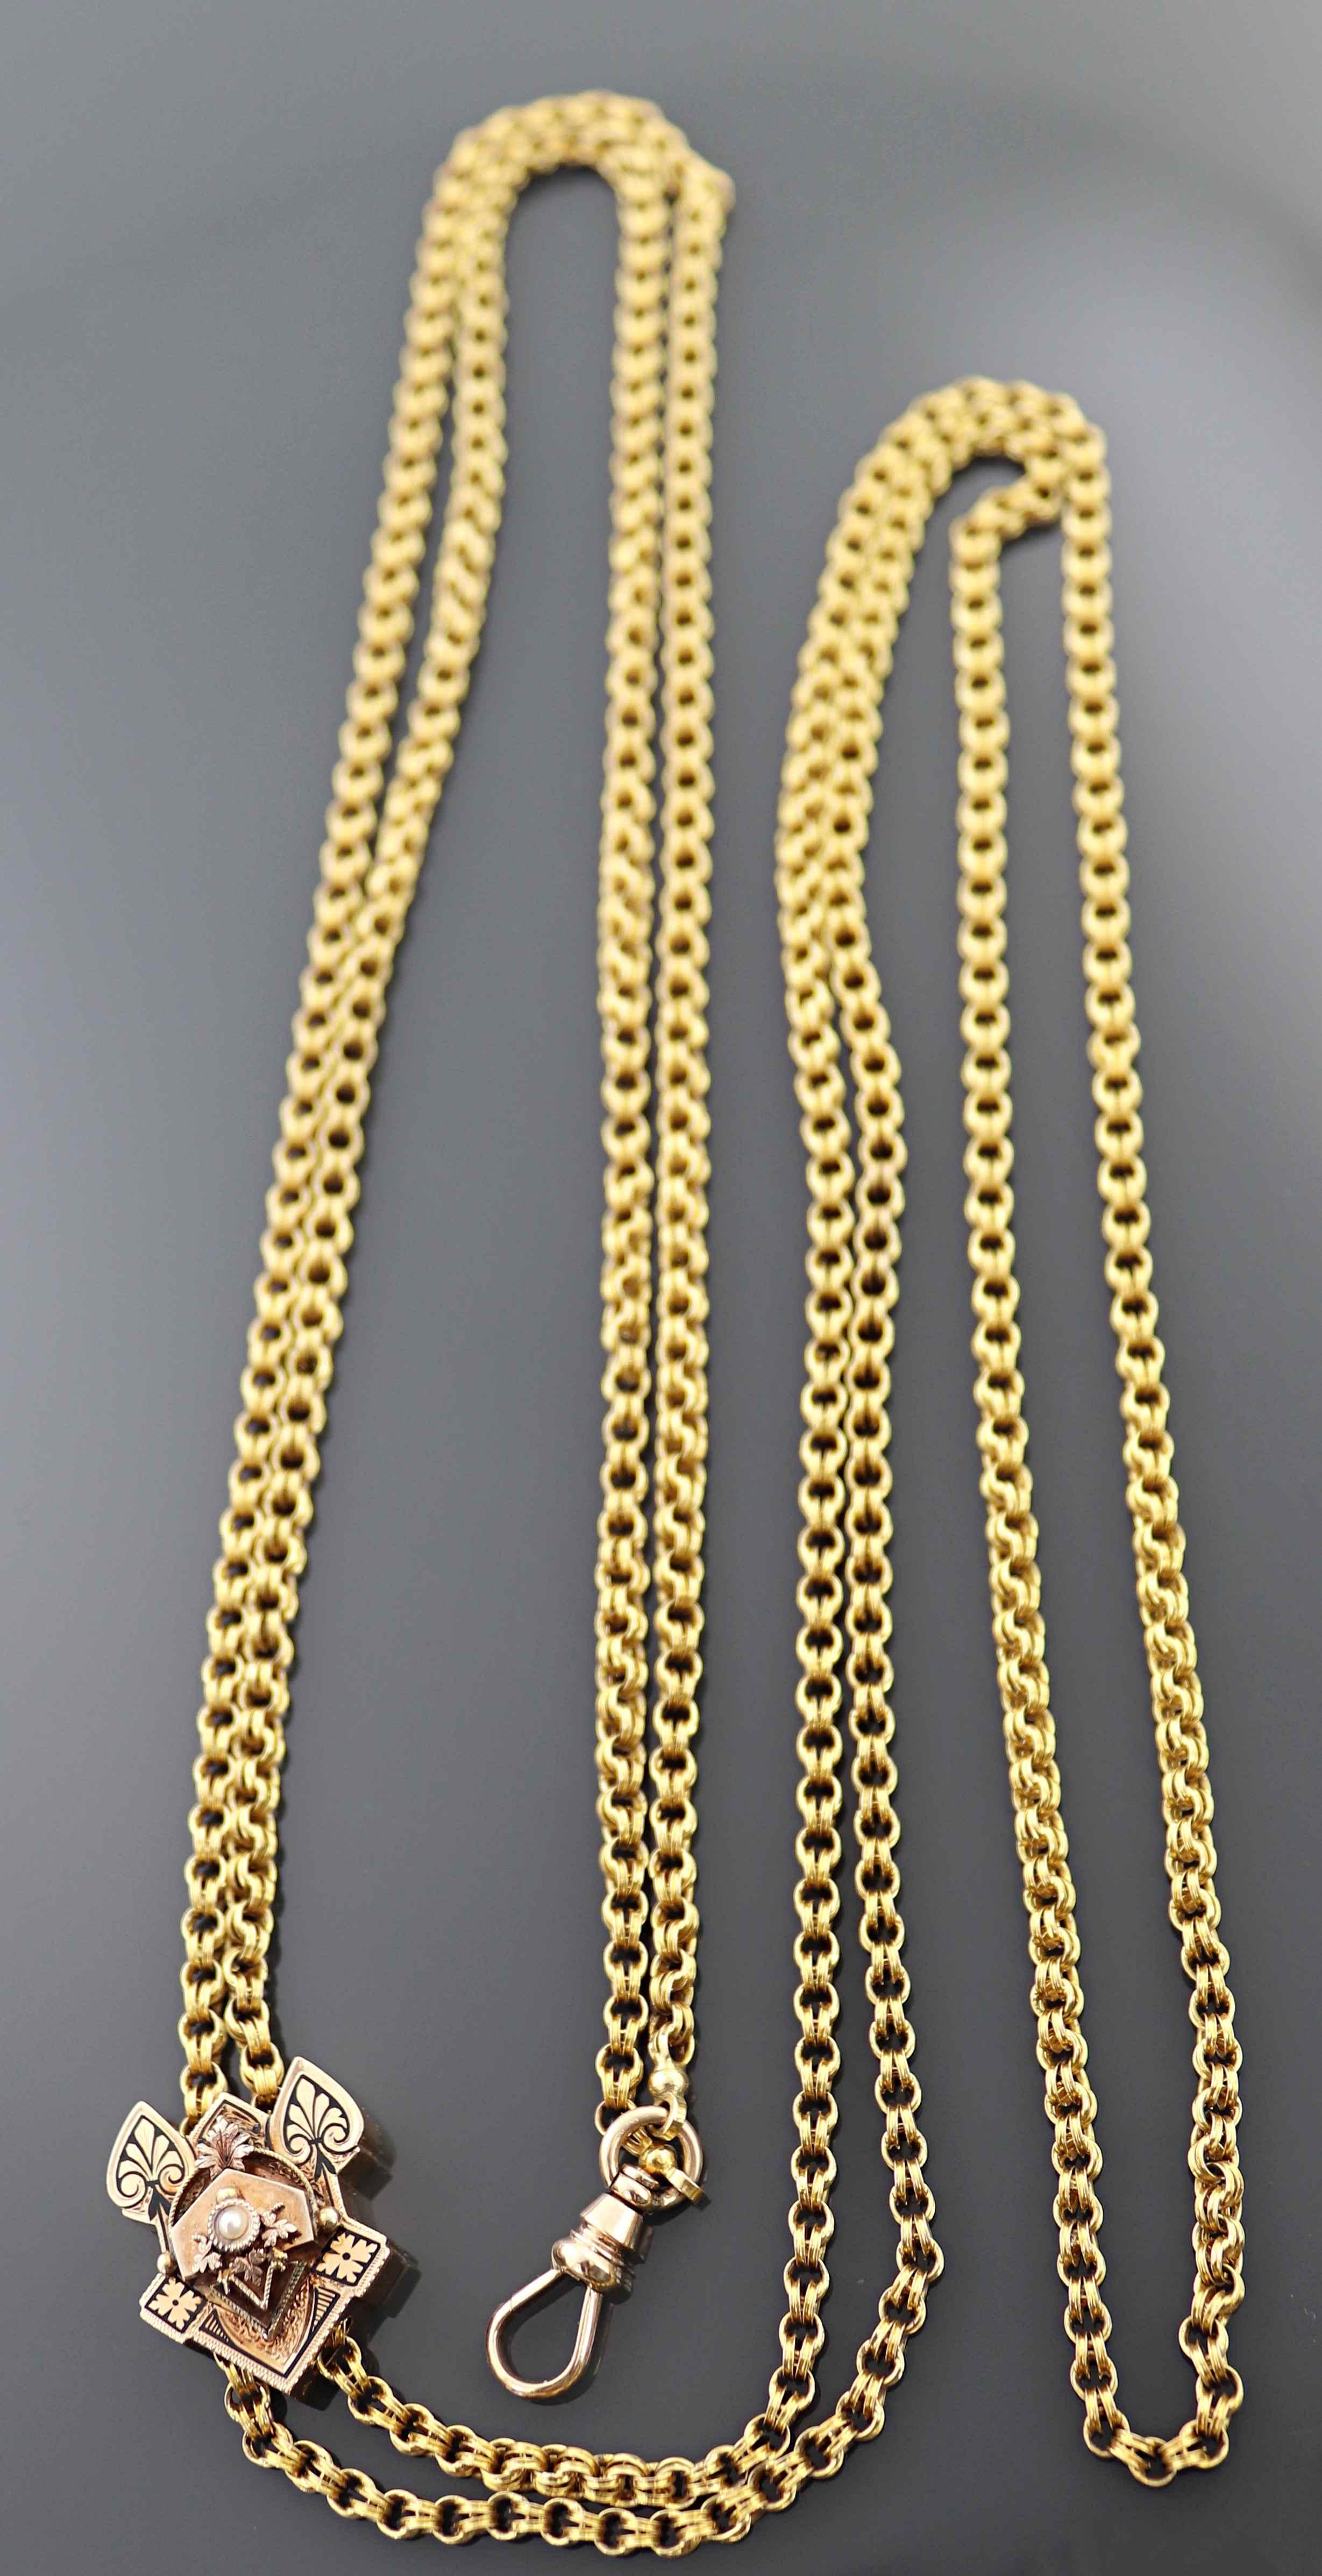 The 2.9 mm, 14k yellow gold, squared round double round link, features a 14k yellow gold slide, 21.6 X
18.2 12.2 mm, accented with a 2.00 mm, half seed pearl button and black enamel tracery, completed by
a swivel hook, forming a 32-inch necklace,